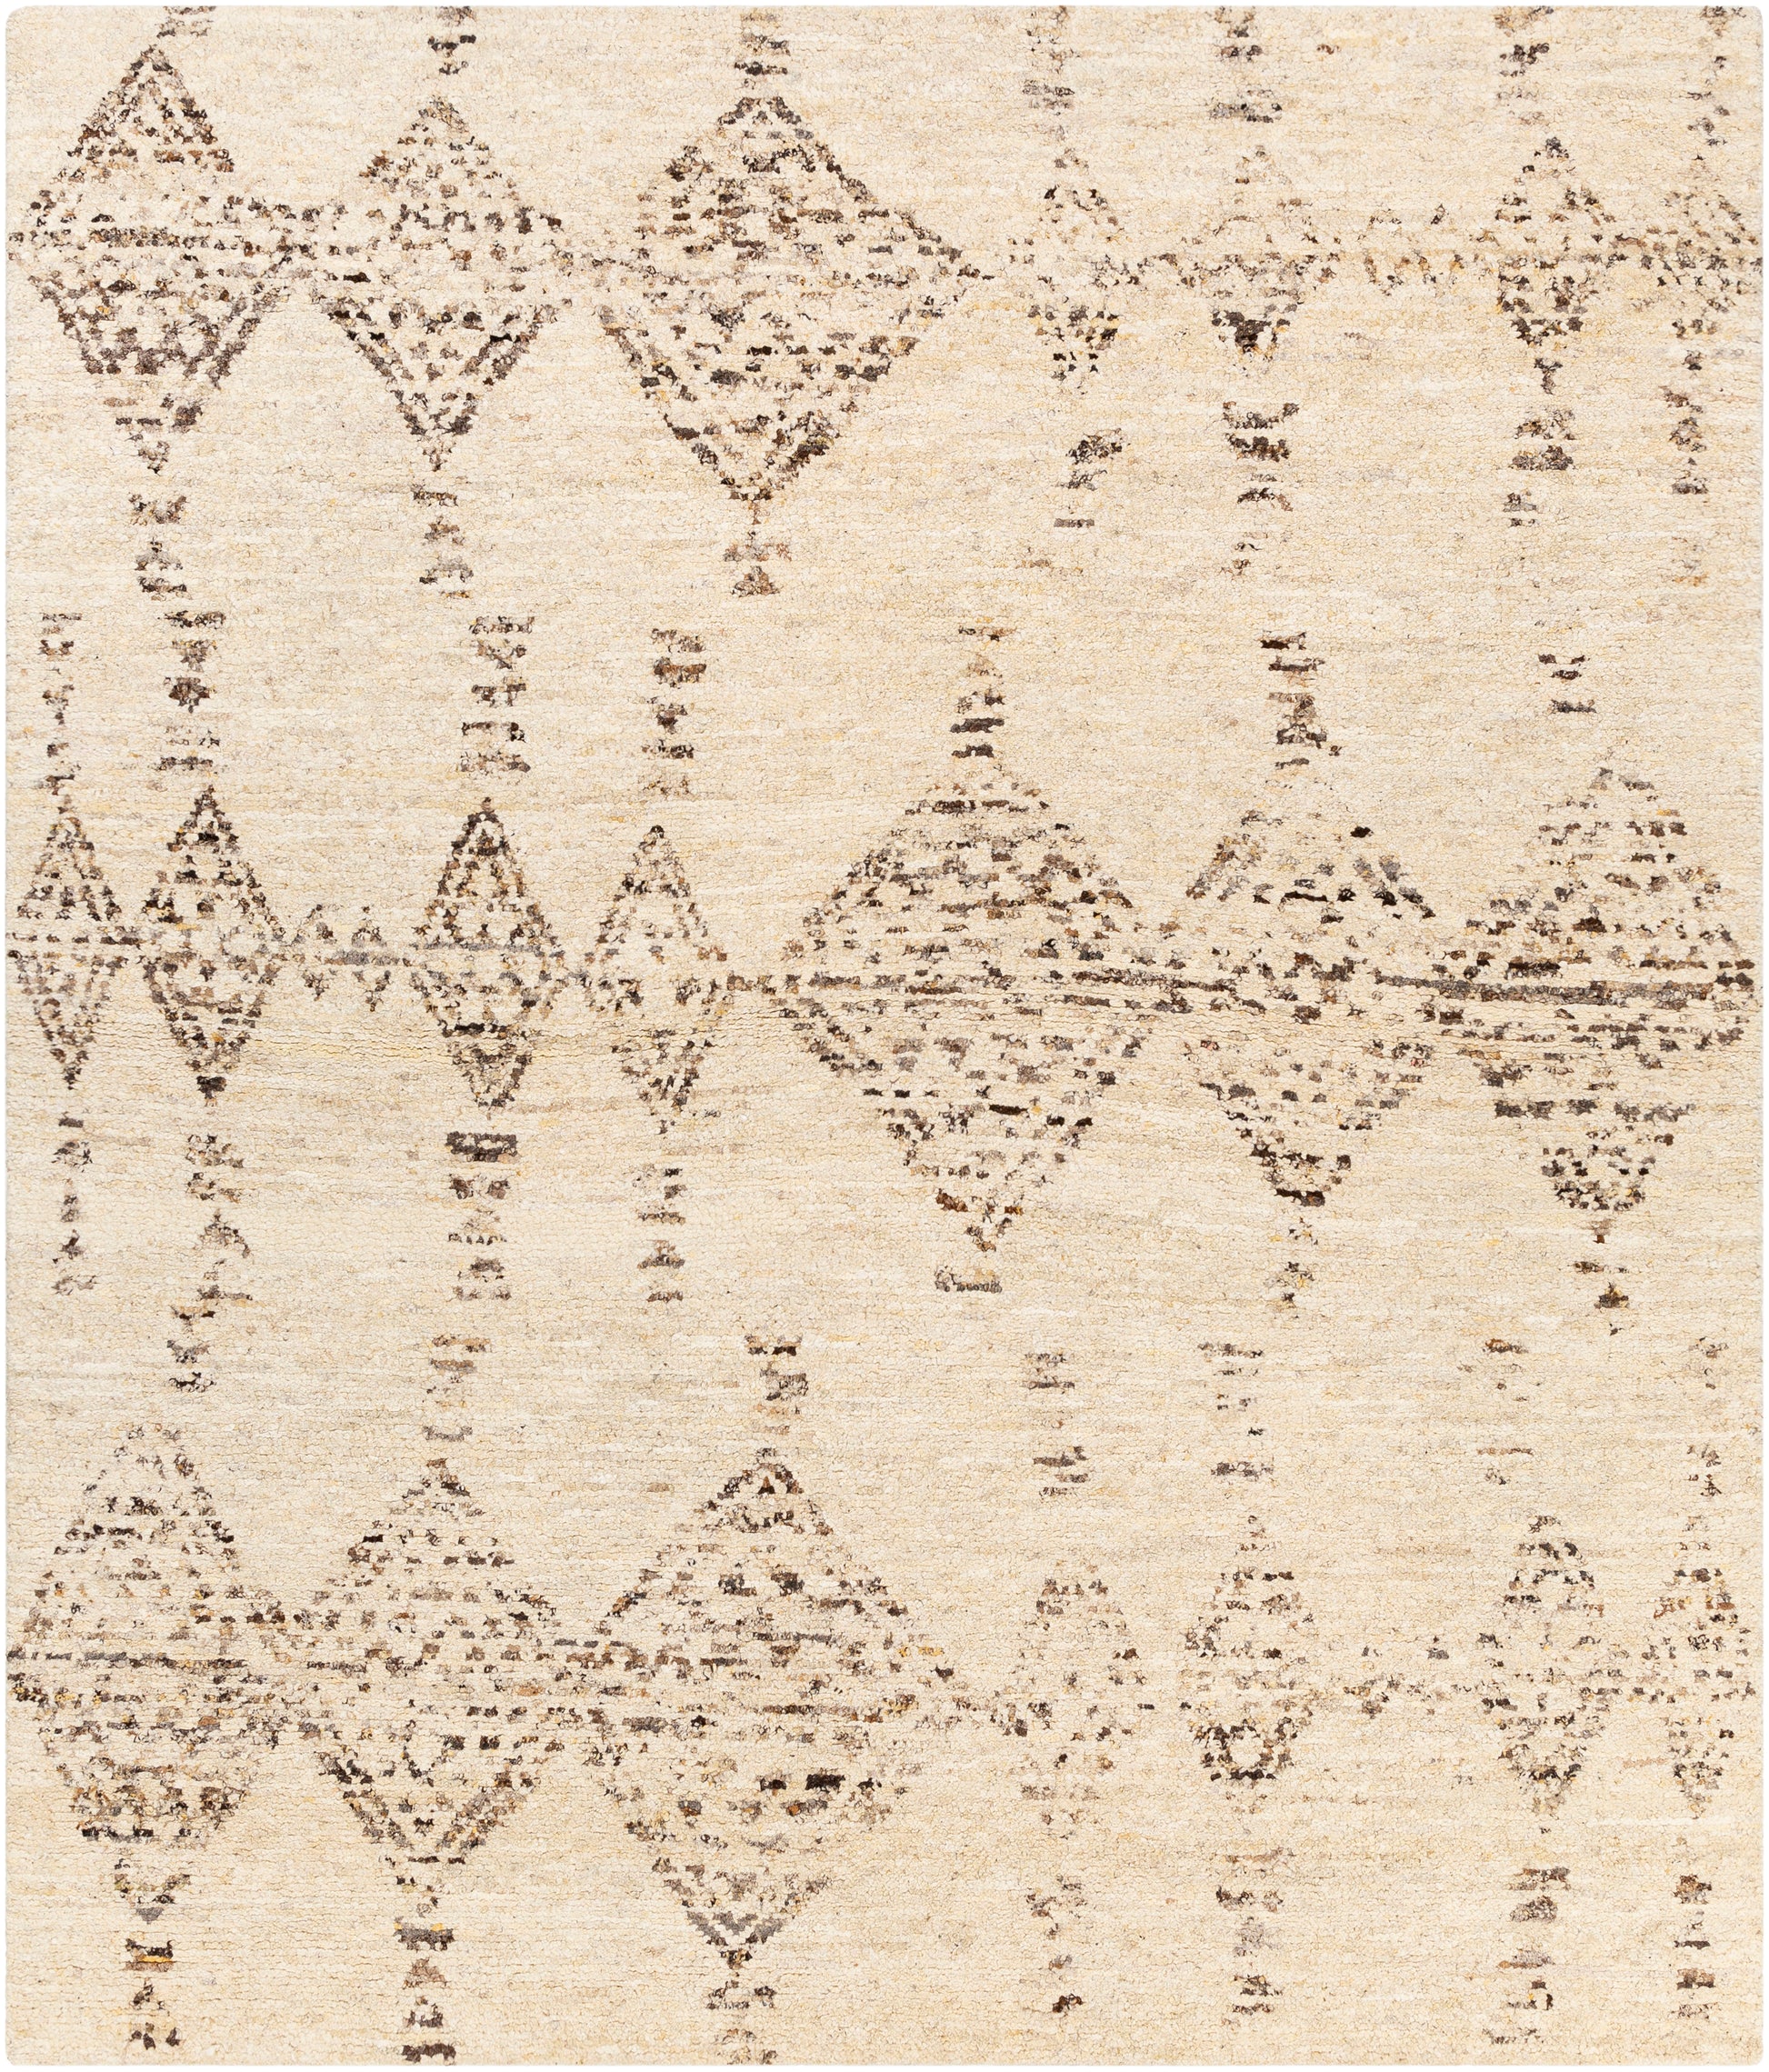 Surya Pampa Pap-1001 Butter, Cream, Dark Brown, Charcoal Area Rug